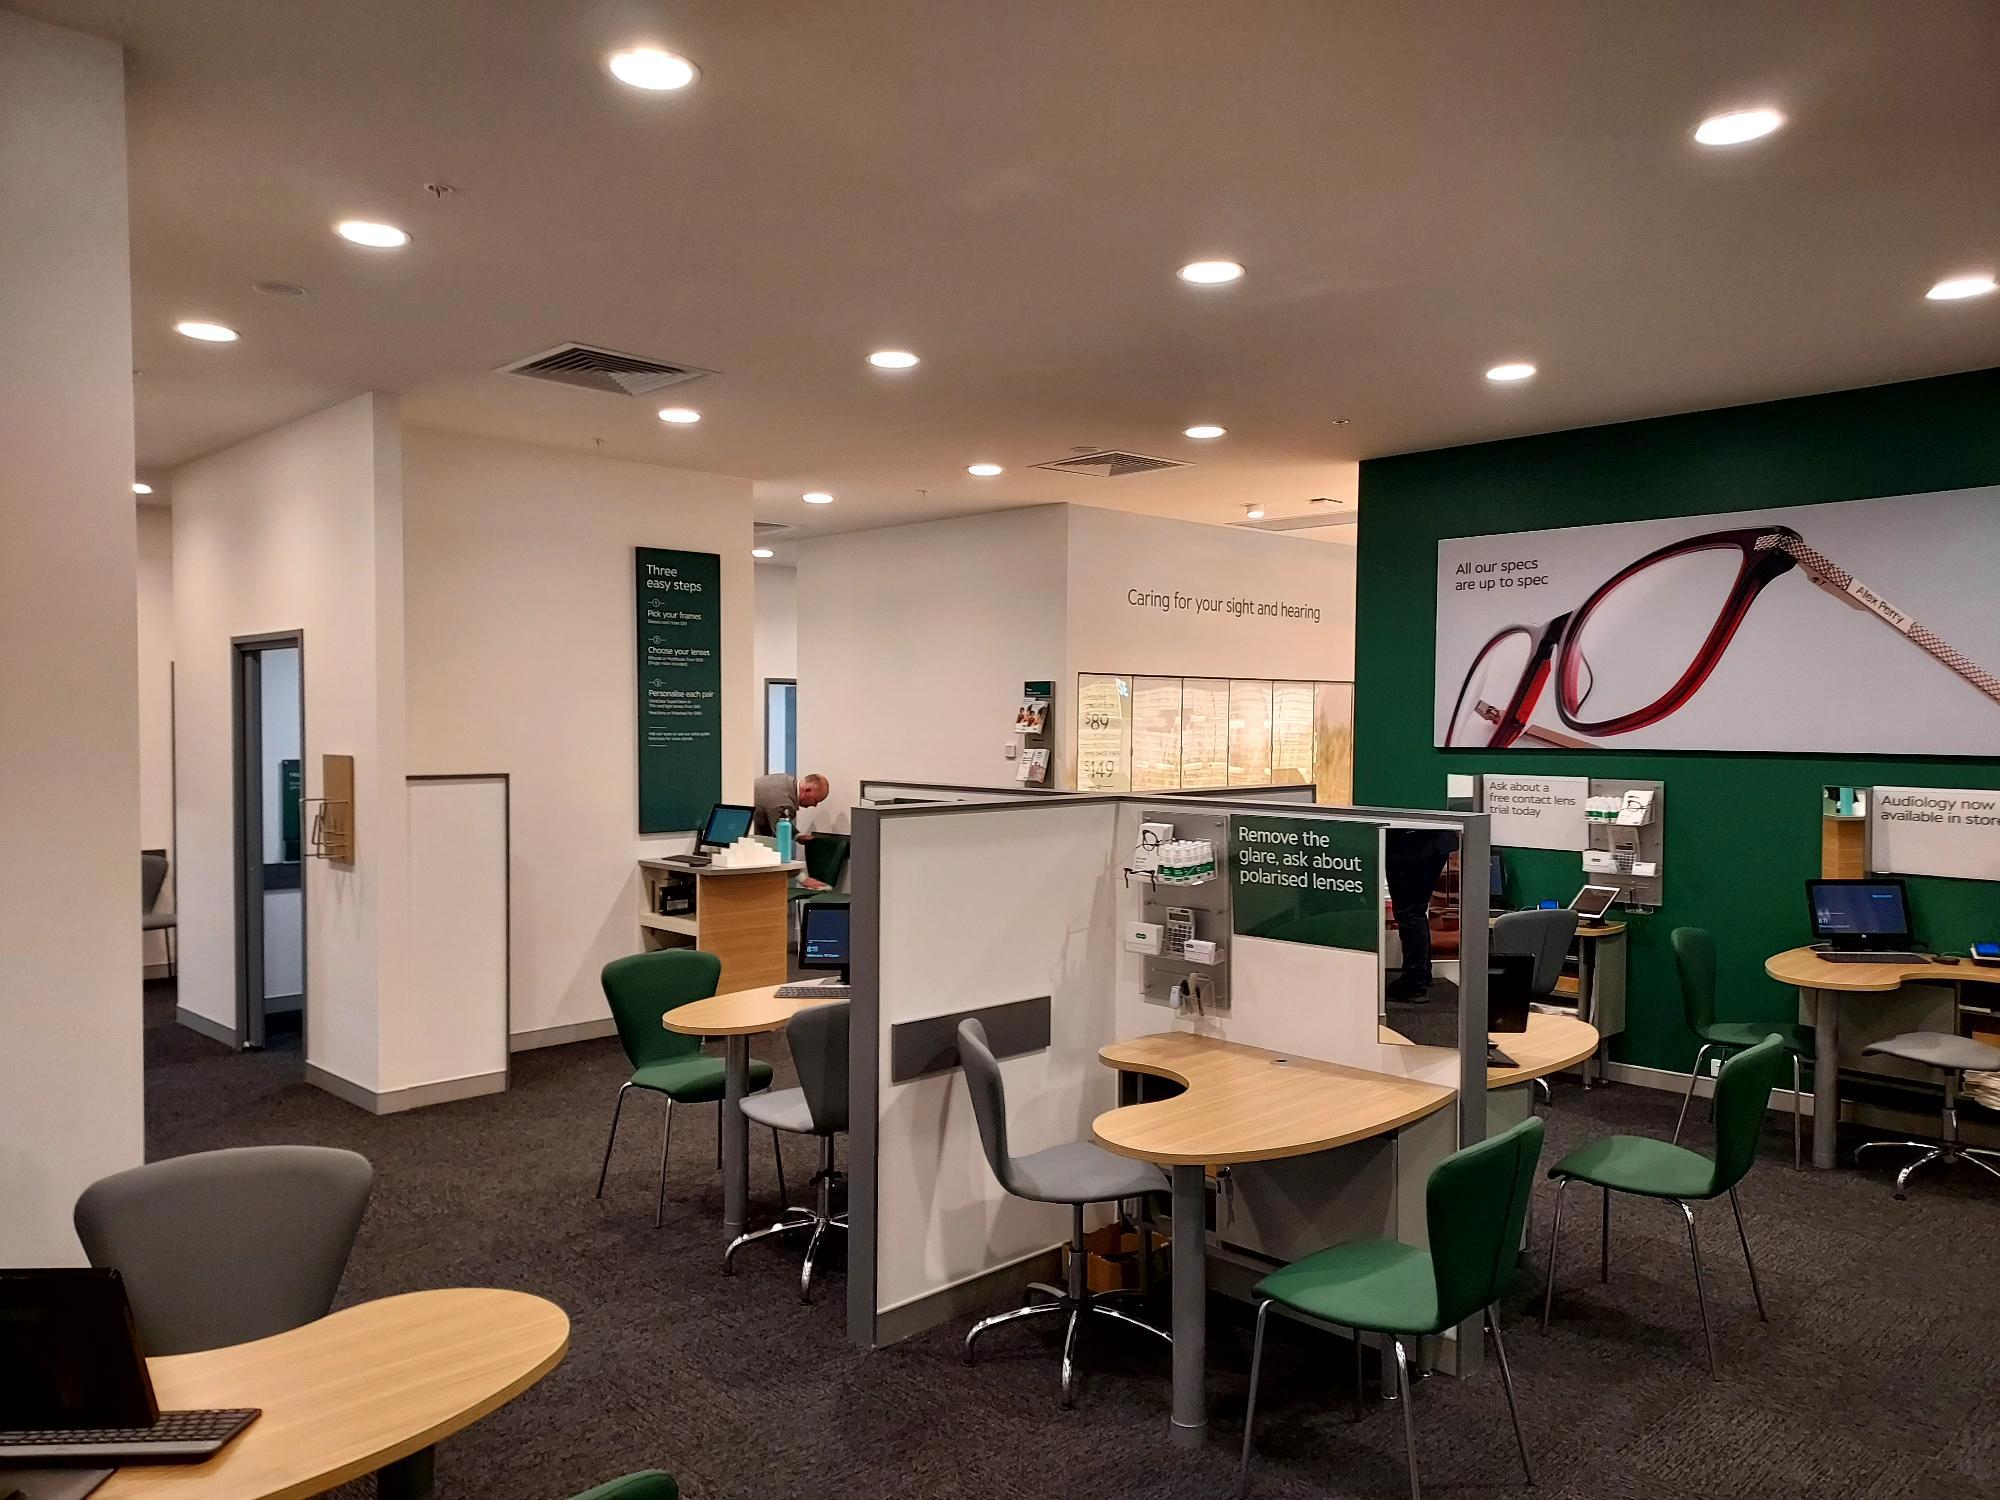 Images Specsavers Optometrists & Audiology - Chirnside Park S/C